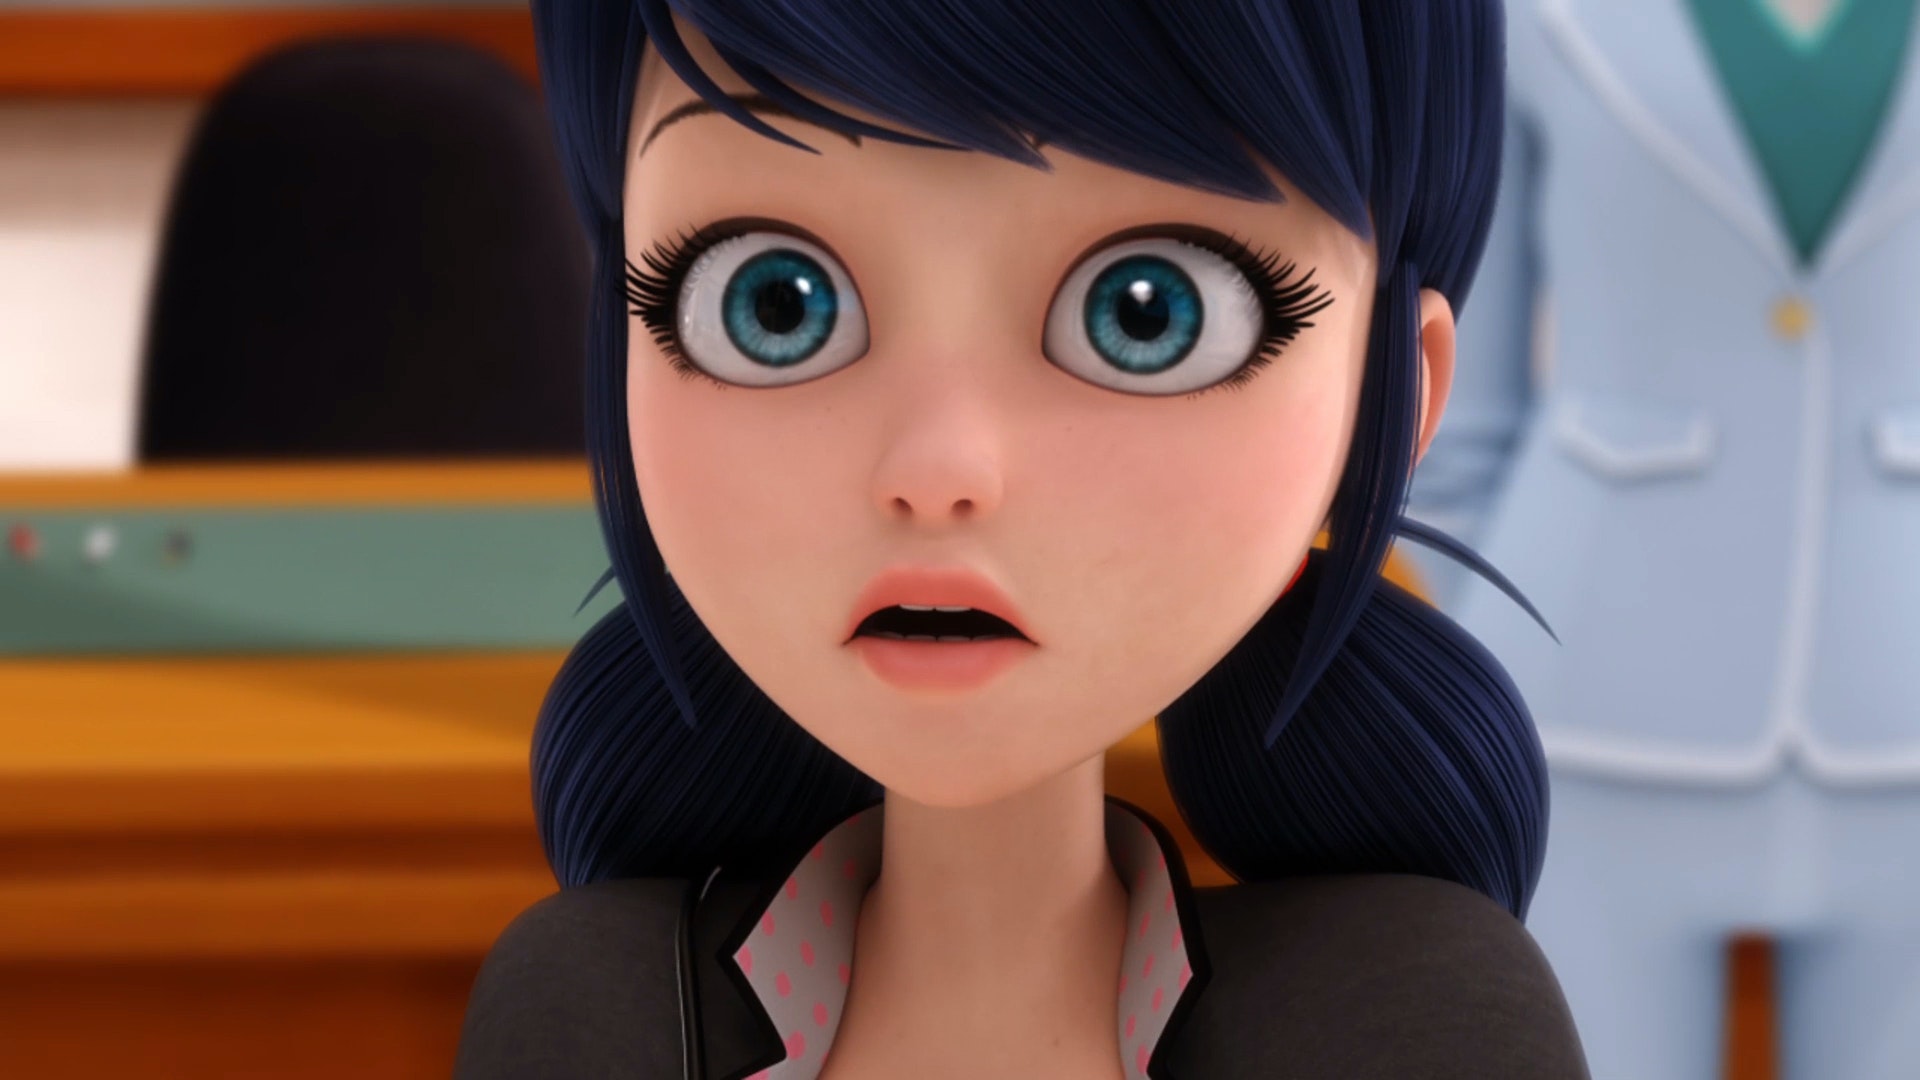 ankit chhaparia add photo pictures of marinette from miraculous ladybug